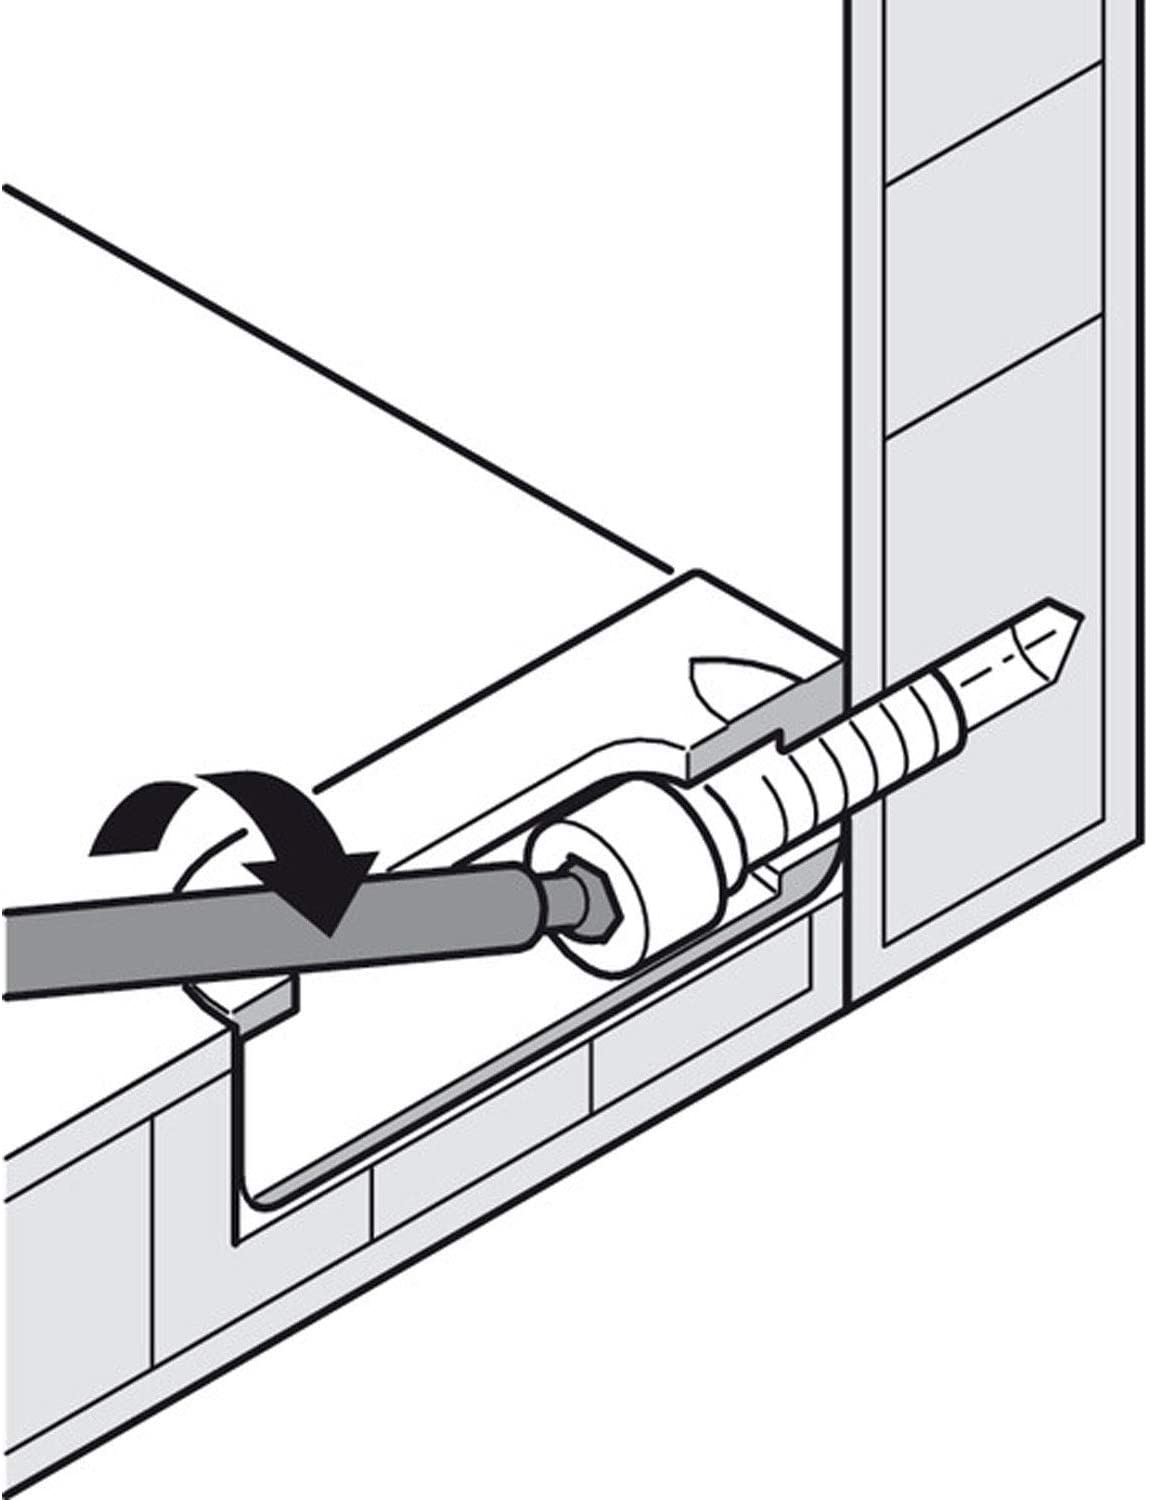 Cutaway illustration showing the use of the Lamello ball end hex bit to fasten a Cabineo connection